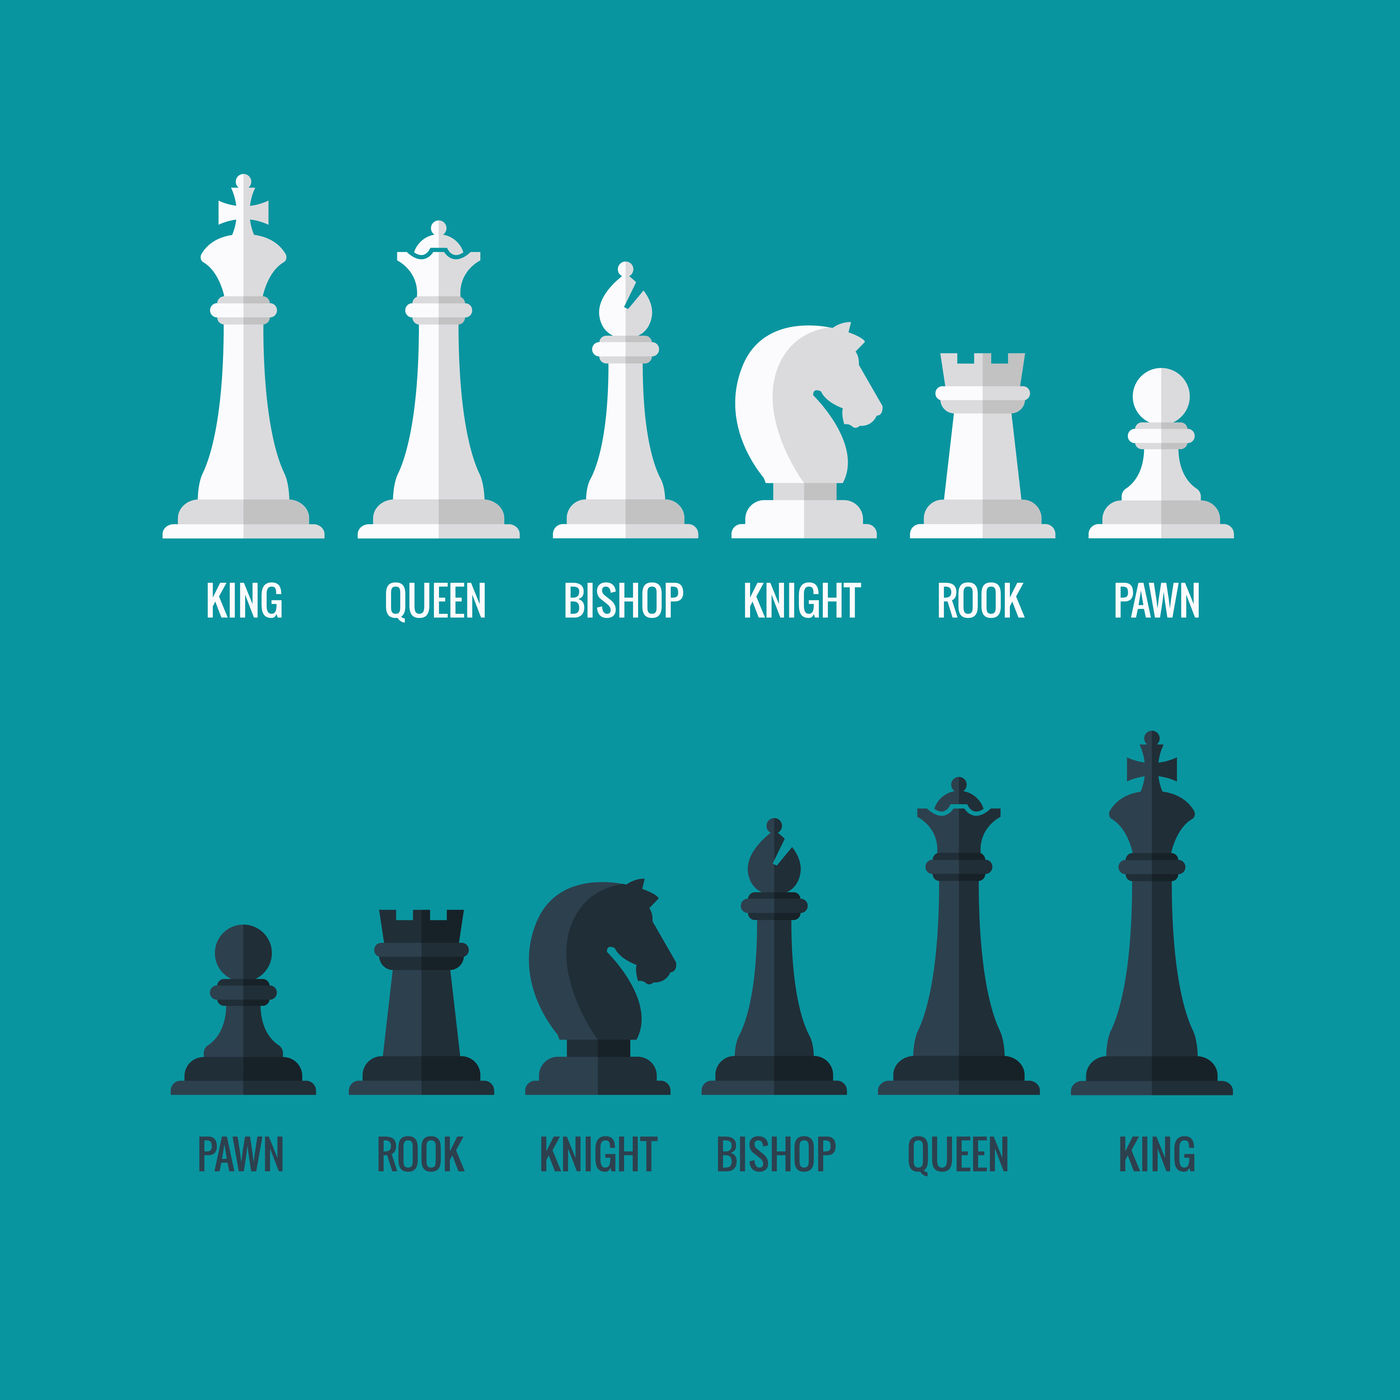 Premium Vector  Set of chess pieces vector rook knight king pawn